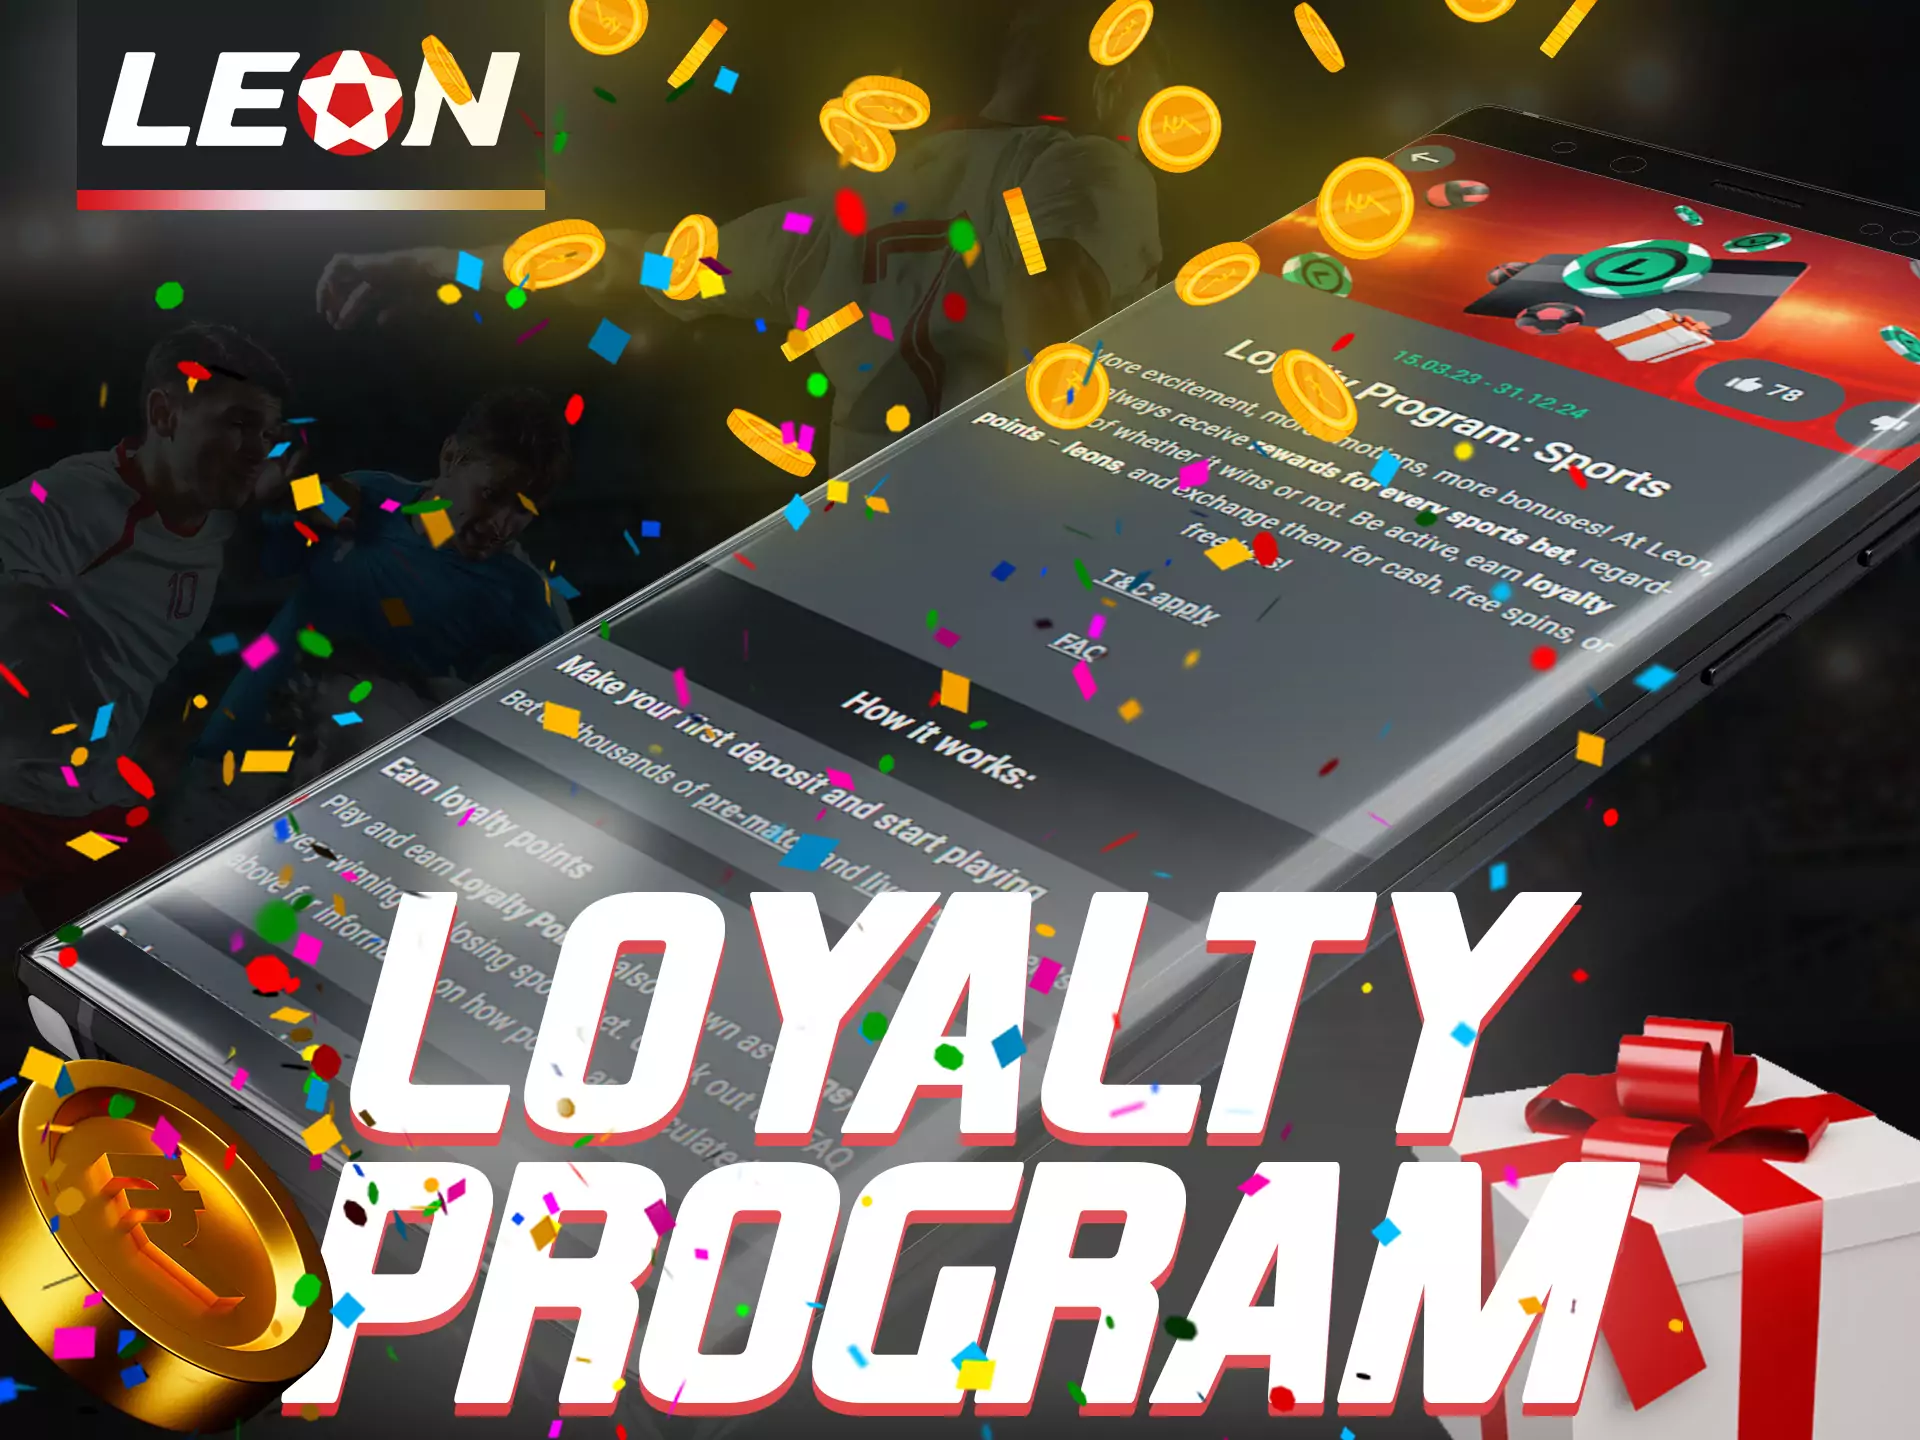 In the Leonbet app you can join the profitable loyalty program.